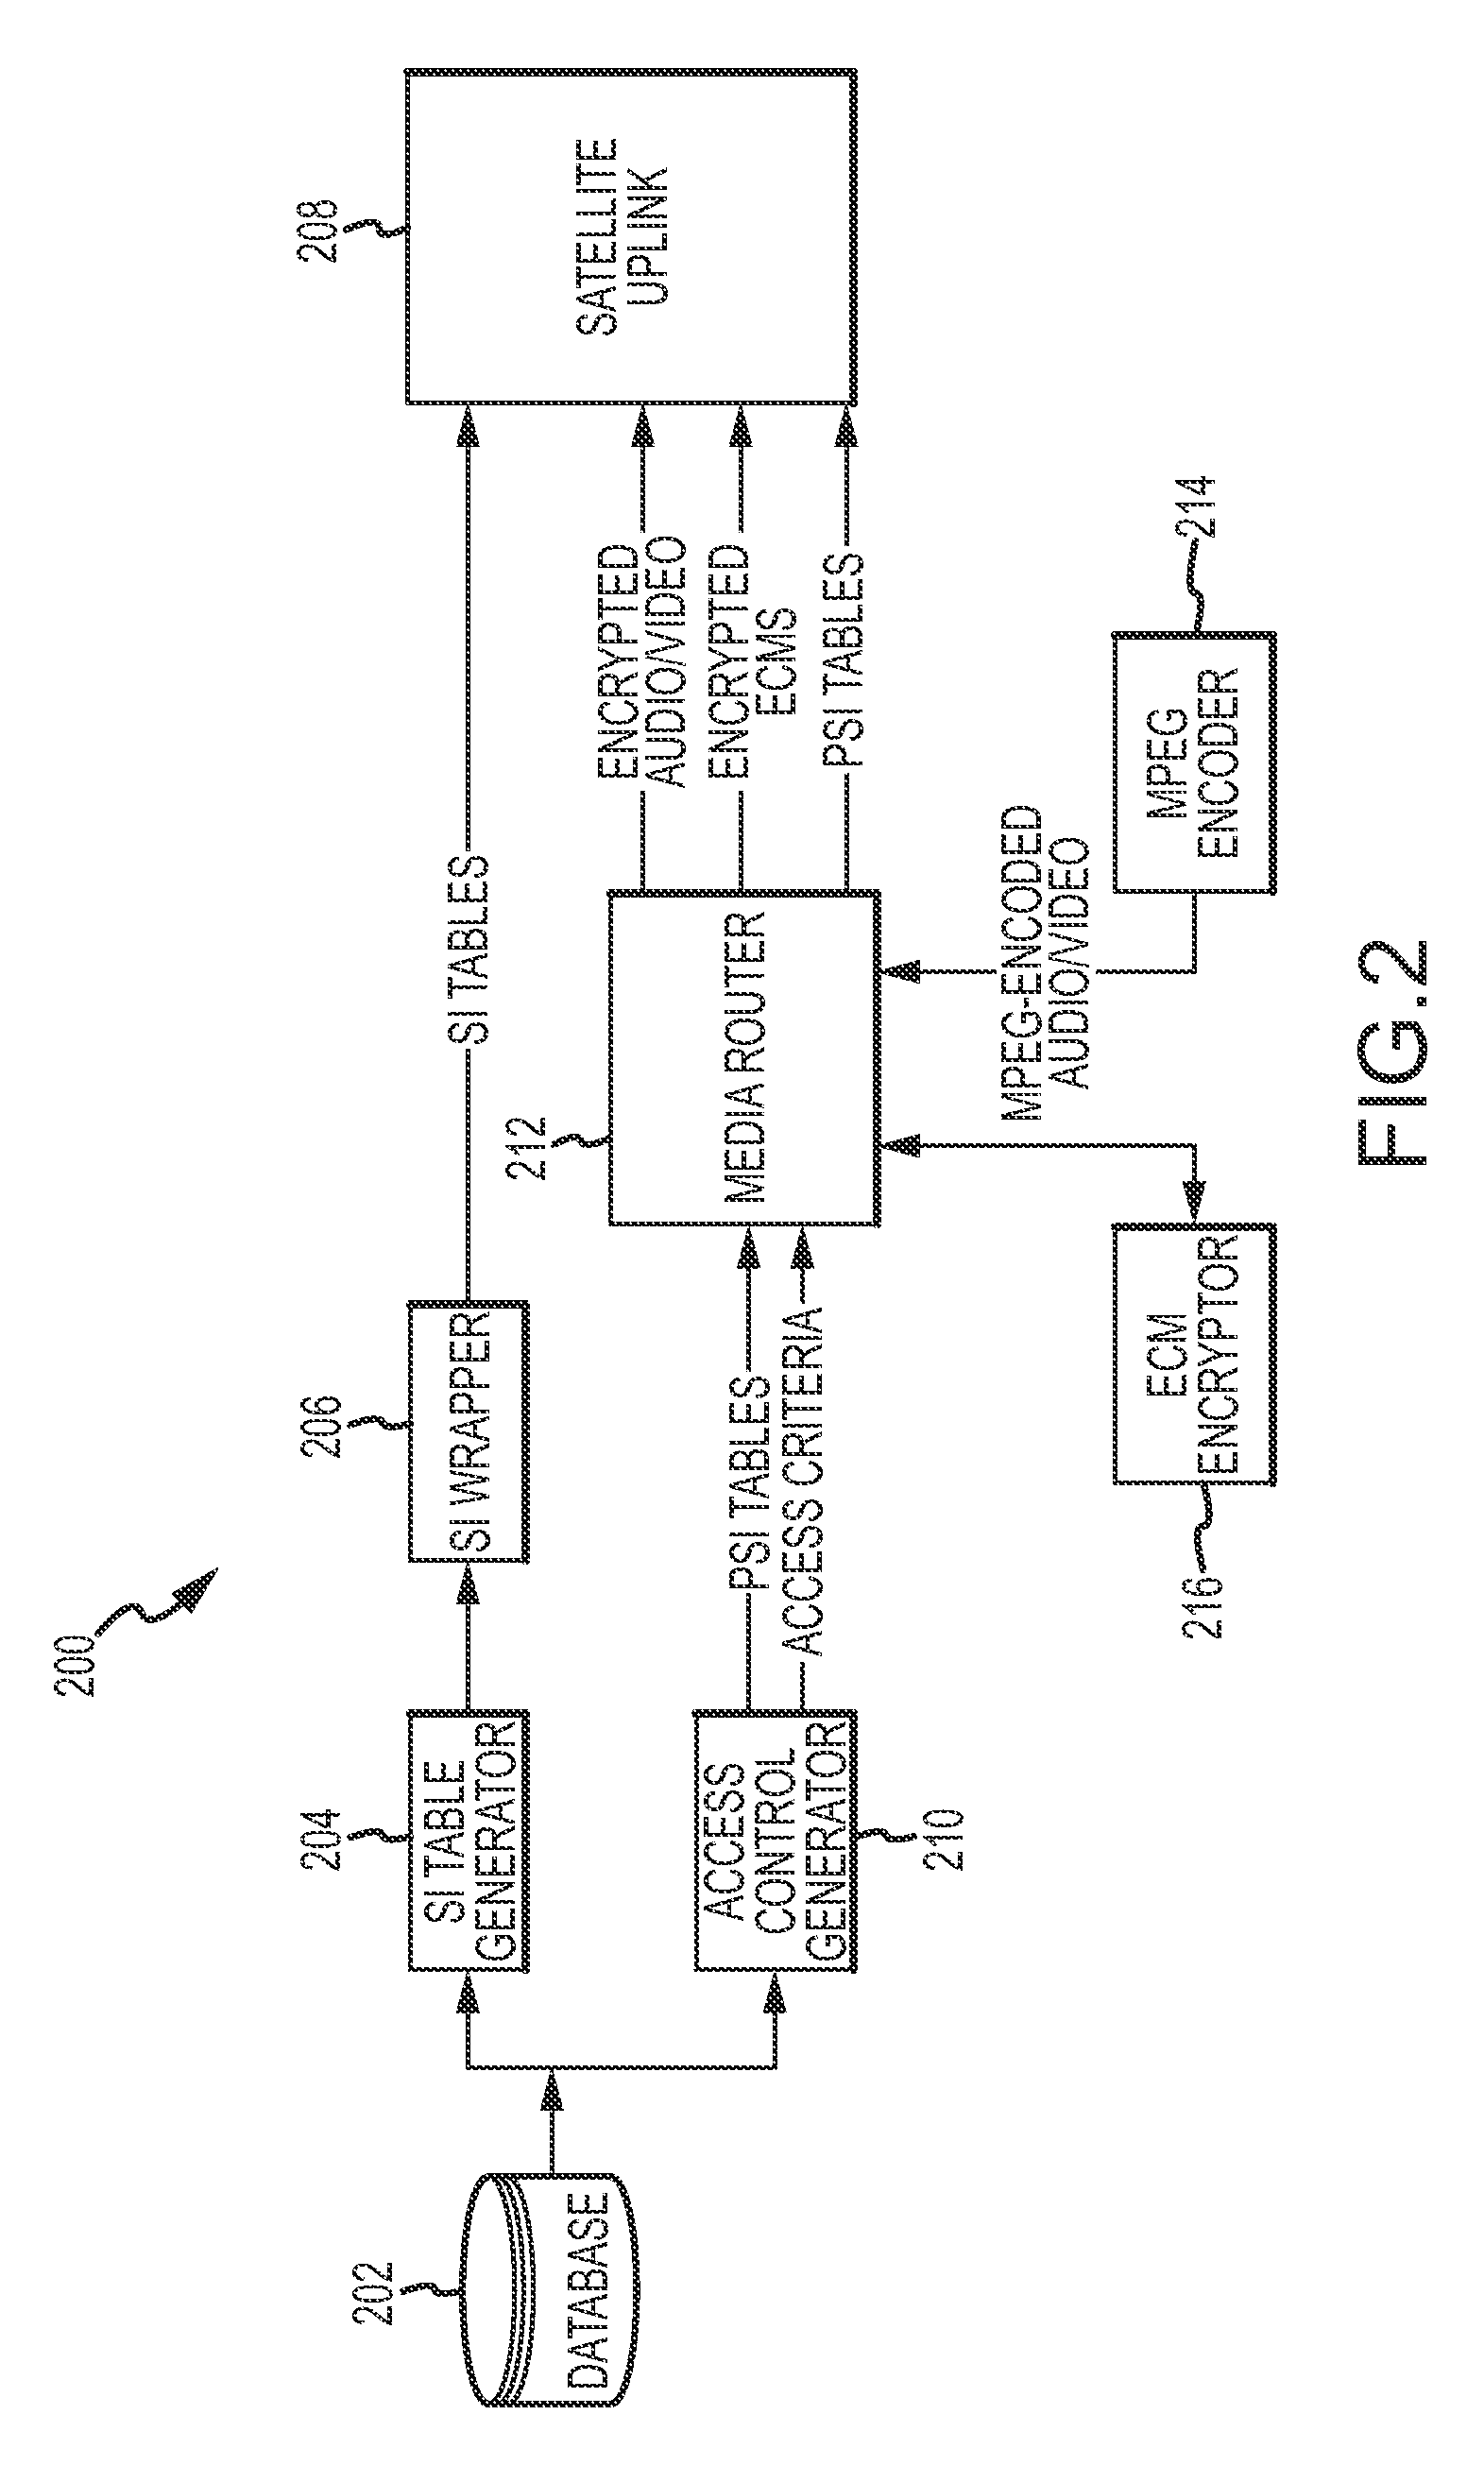 System and method for controlling alternative access to video events associated with video broadcast services